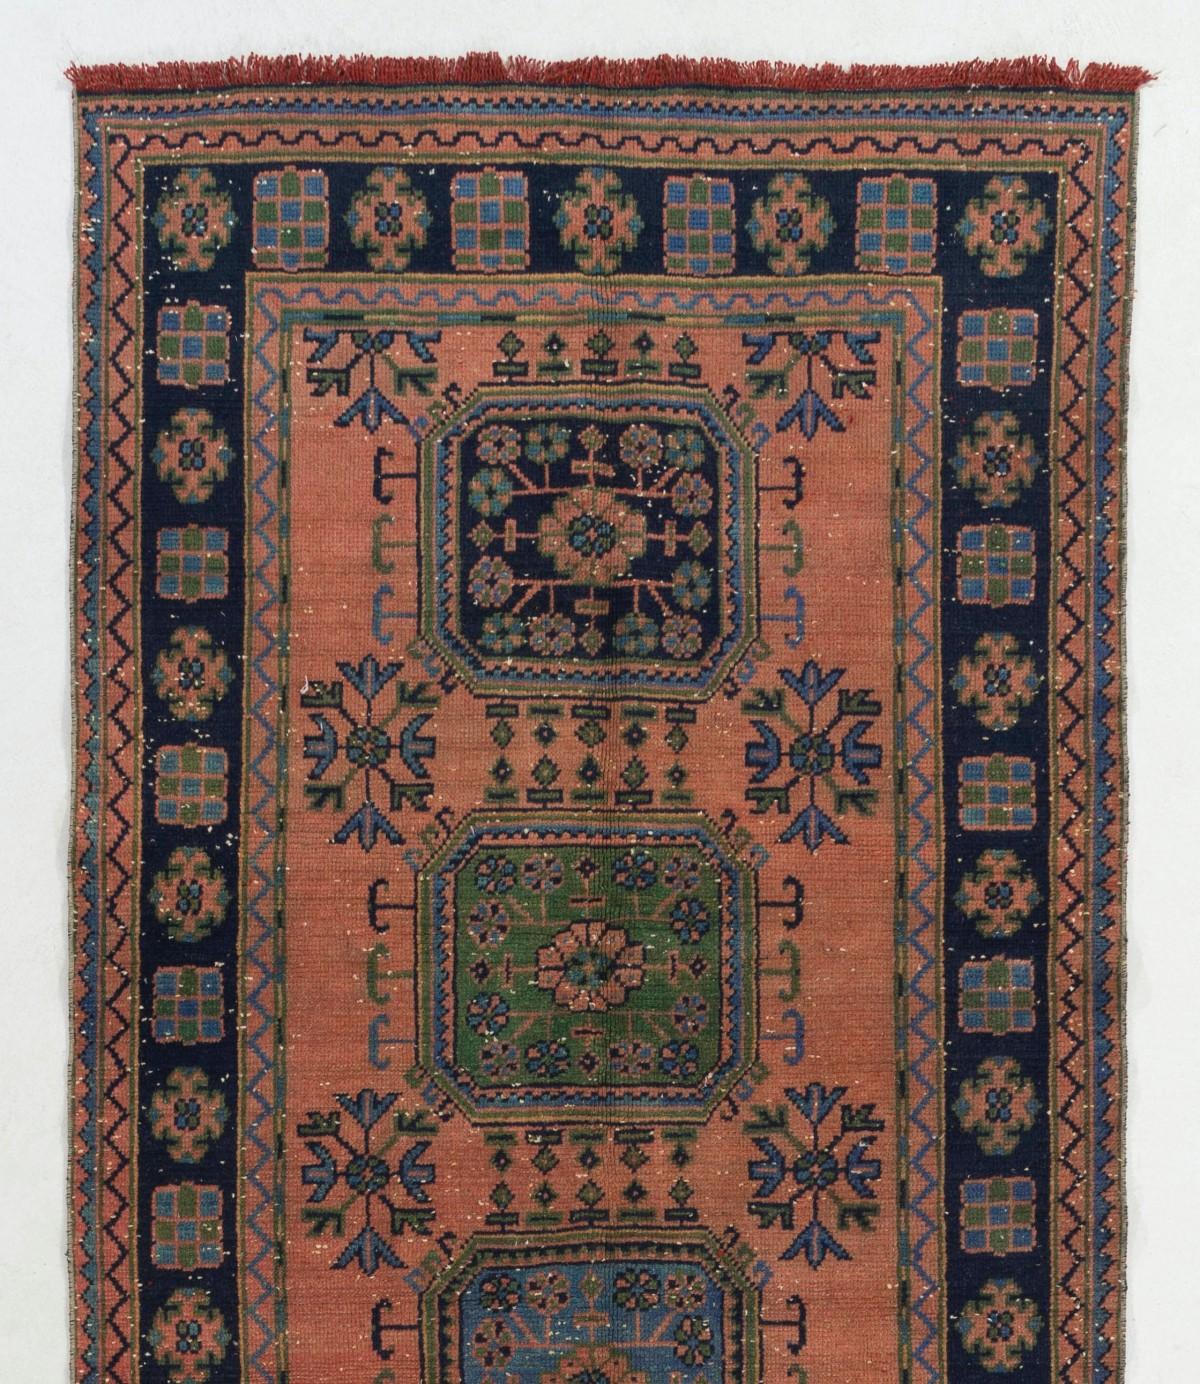 A gorgeous vintage Turkish runner rug, hand-knotted with low wool pile on cotton foundation. It features geometric medallions decorated with floral motifs. It is in good condition, professionally-washed and sturdy. Measures: 4.7 x 11 ft.